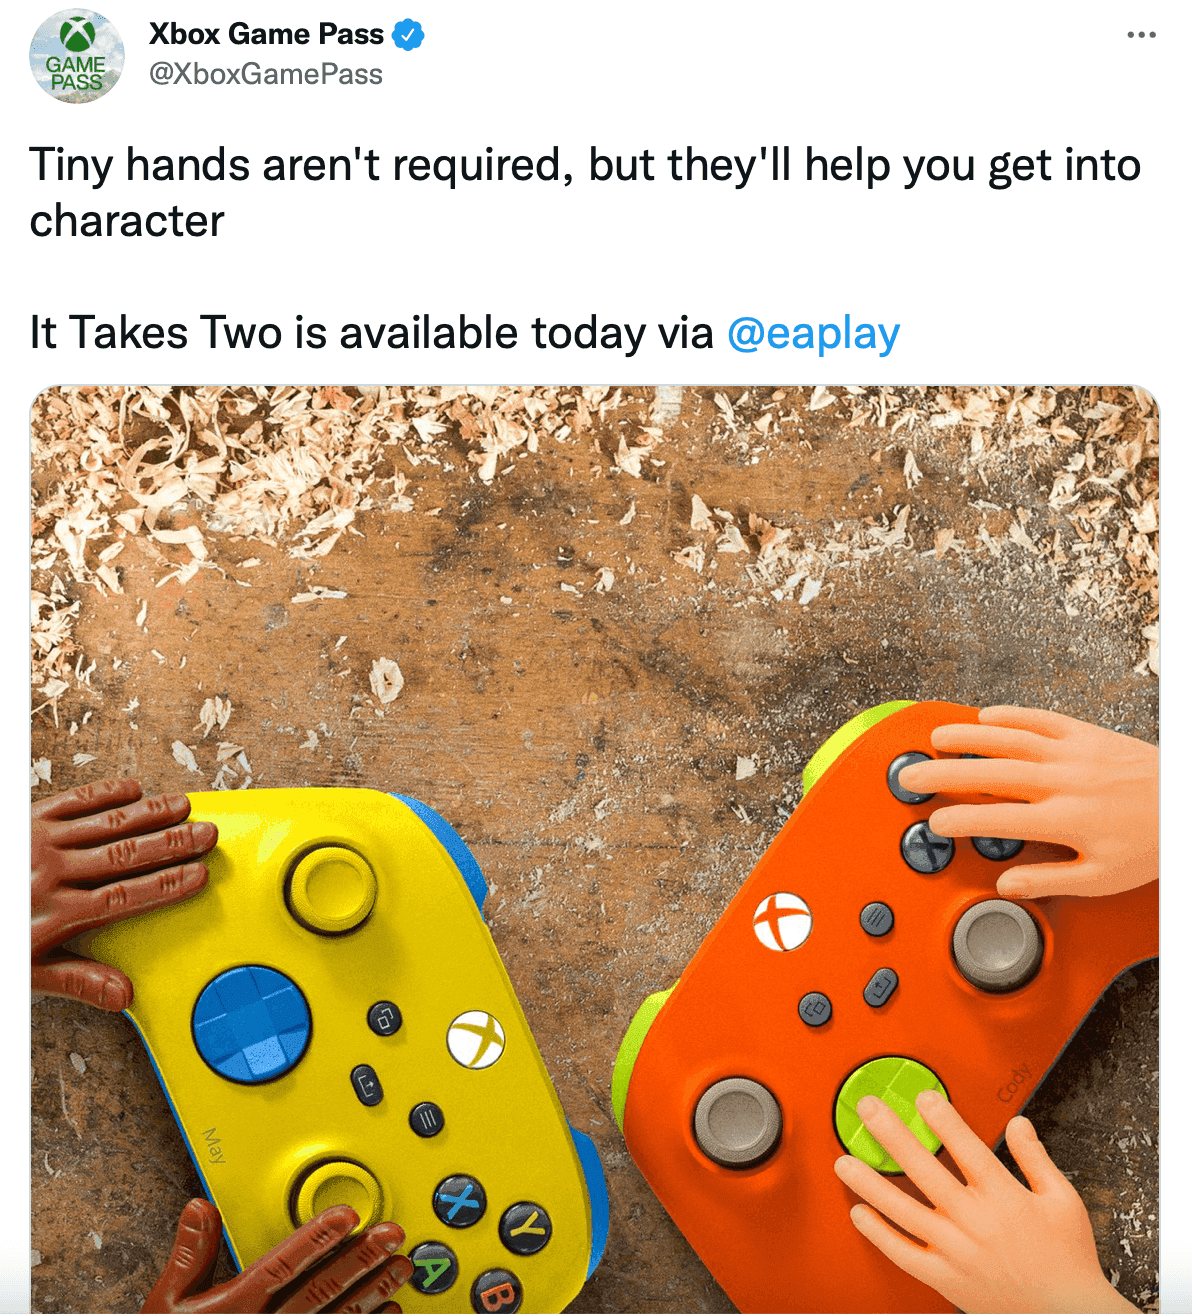 Xbox Game Pass tweet about "It Takes Two" available on EA Play with picture of tiny hands playing with Xbox controllers